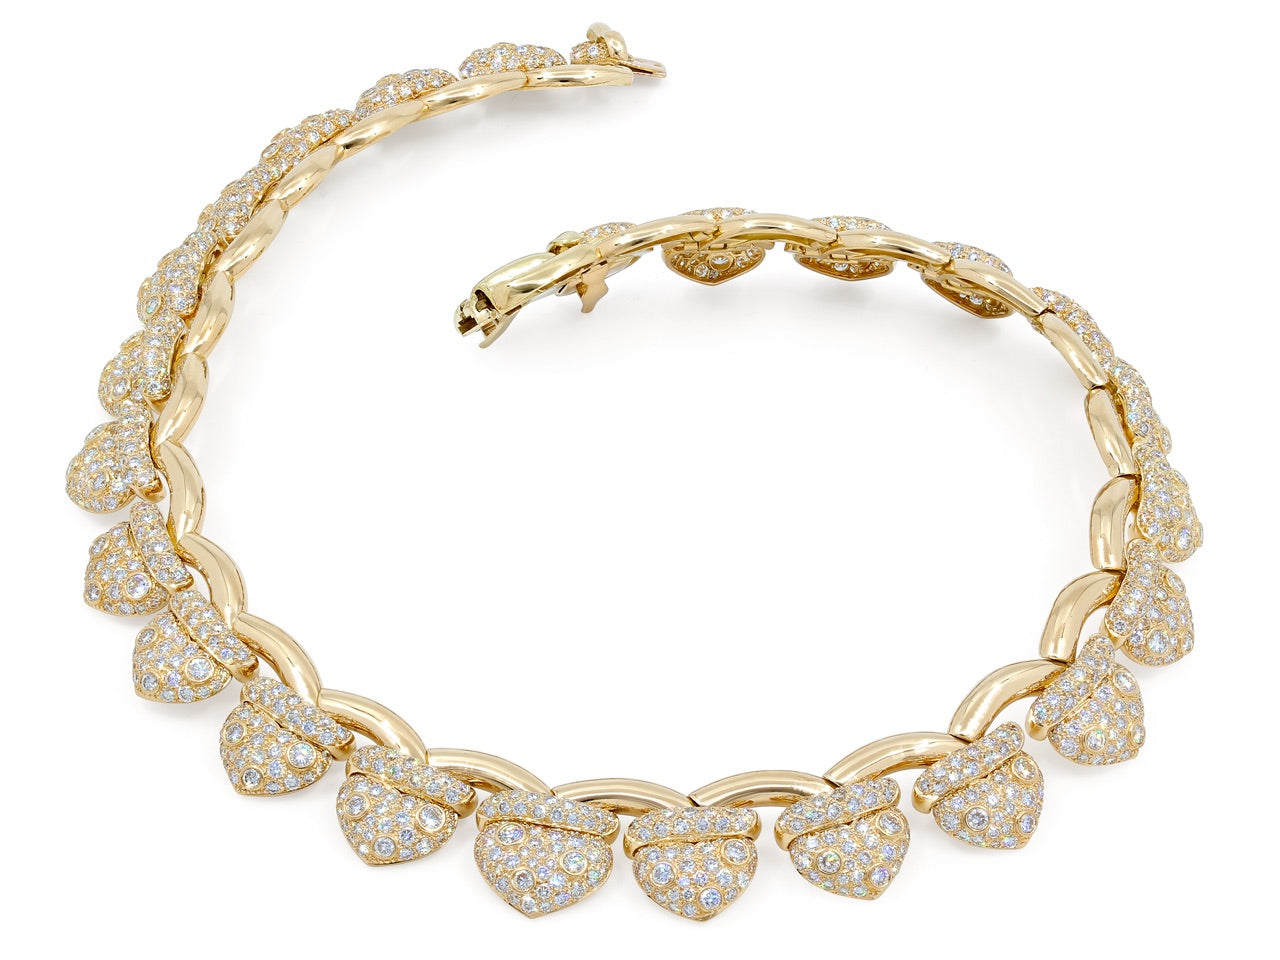 Fred Paris Diamond Necklace in 18K Gold